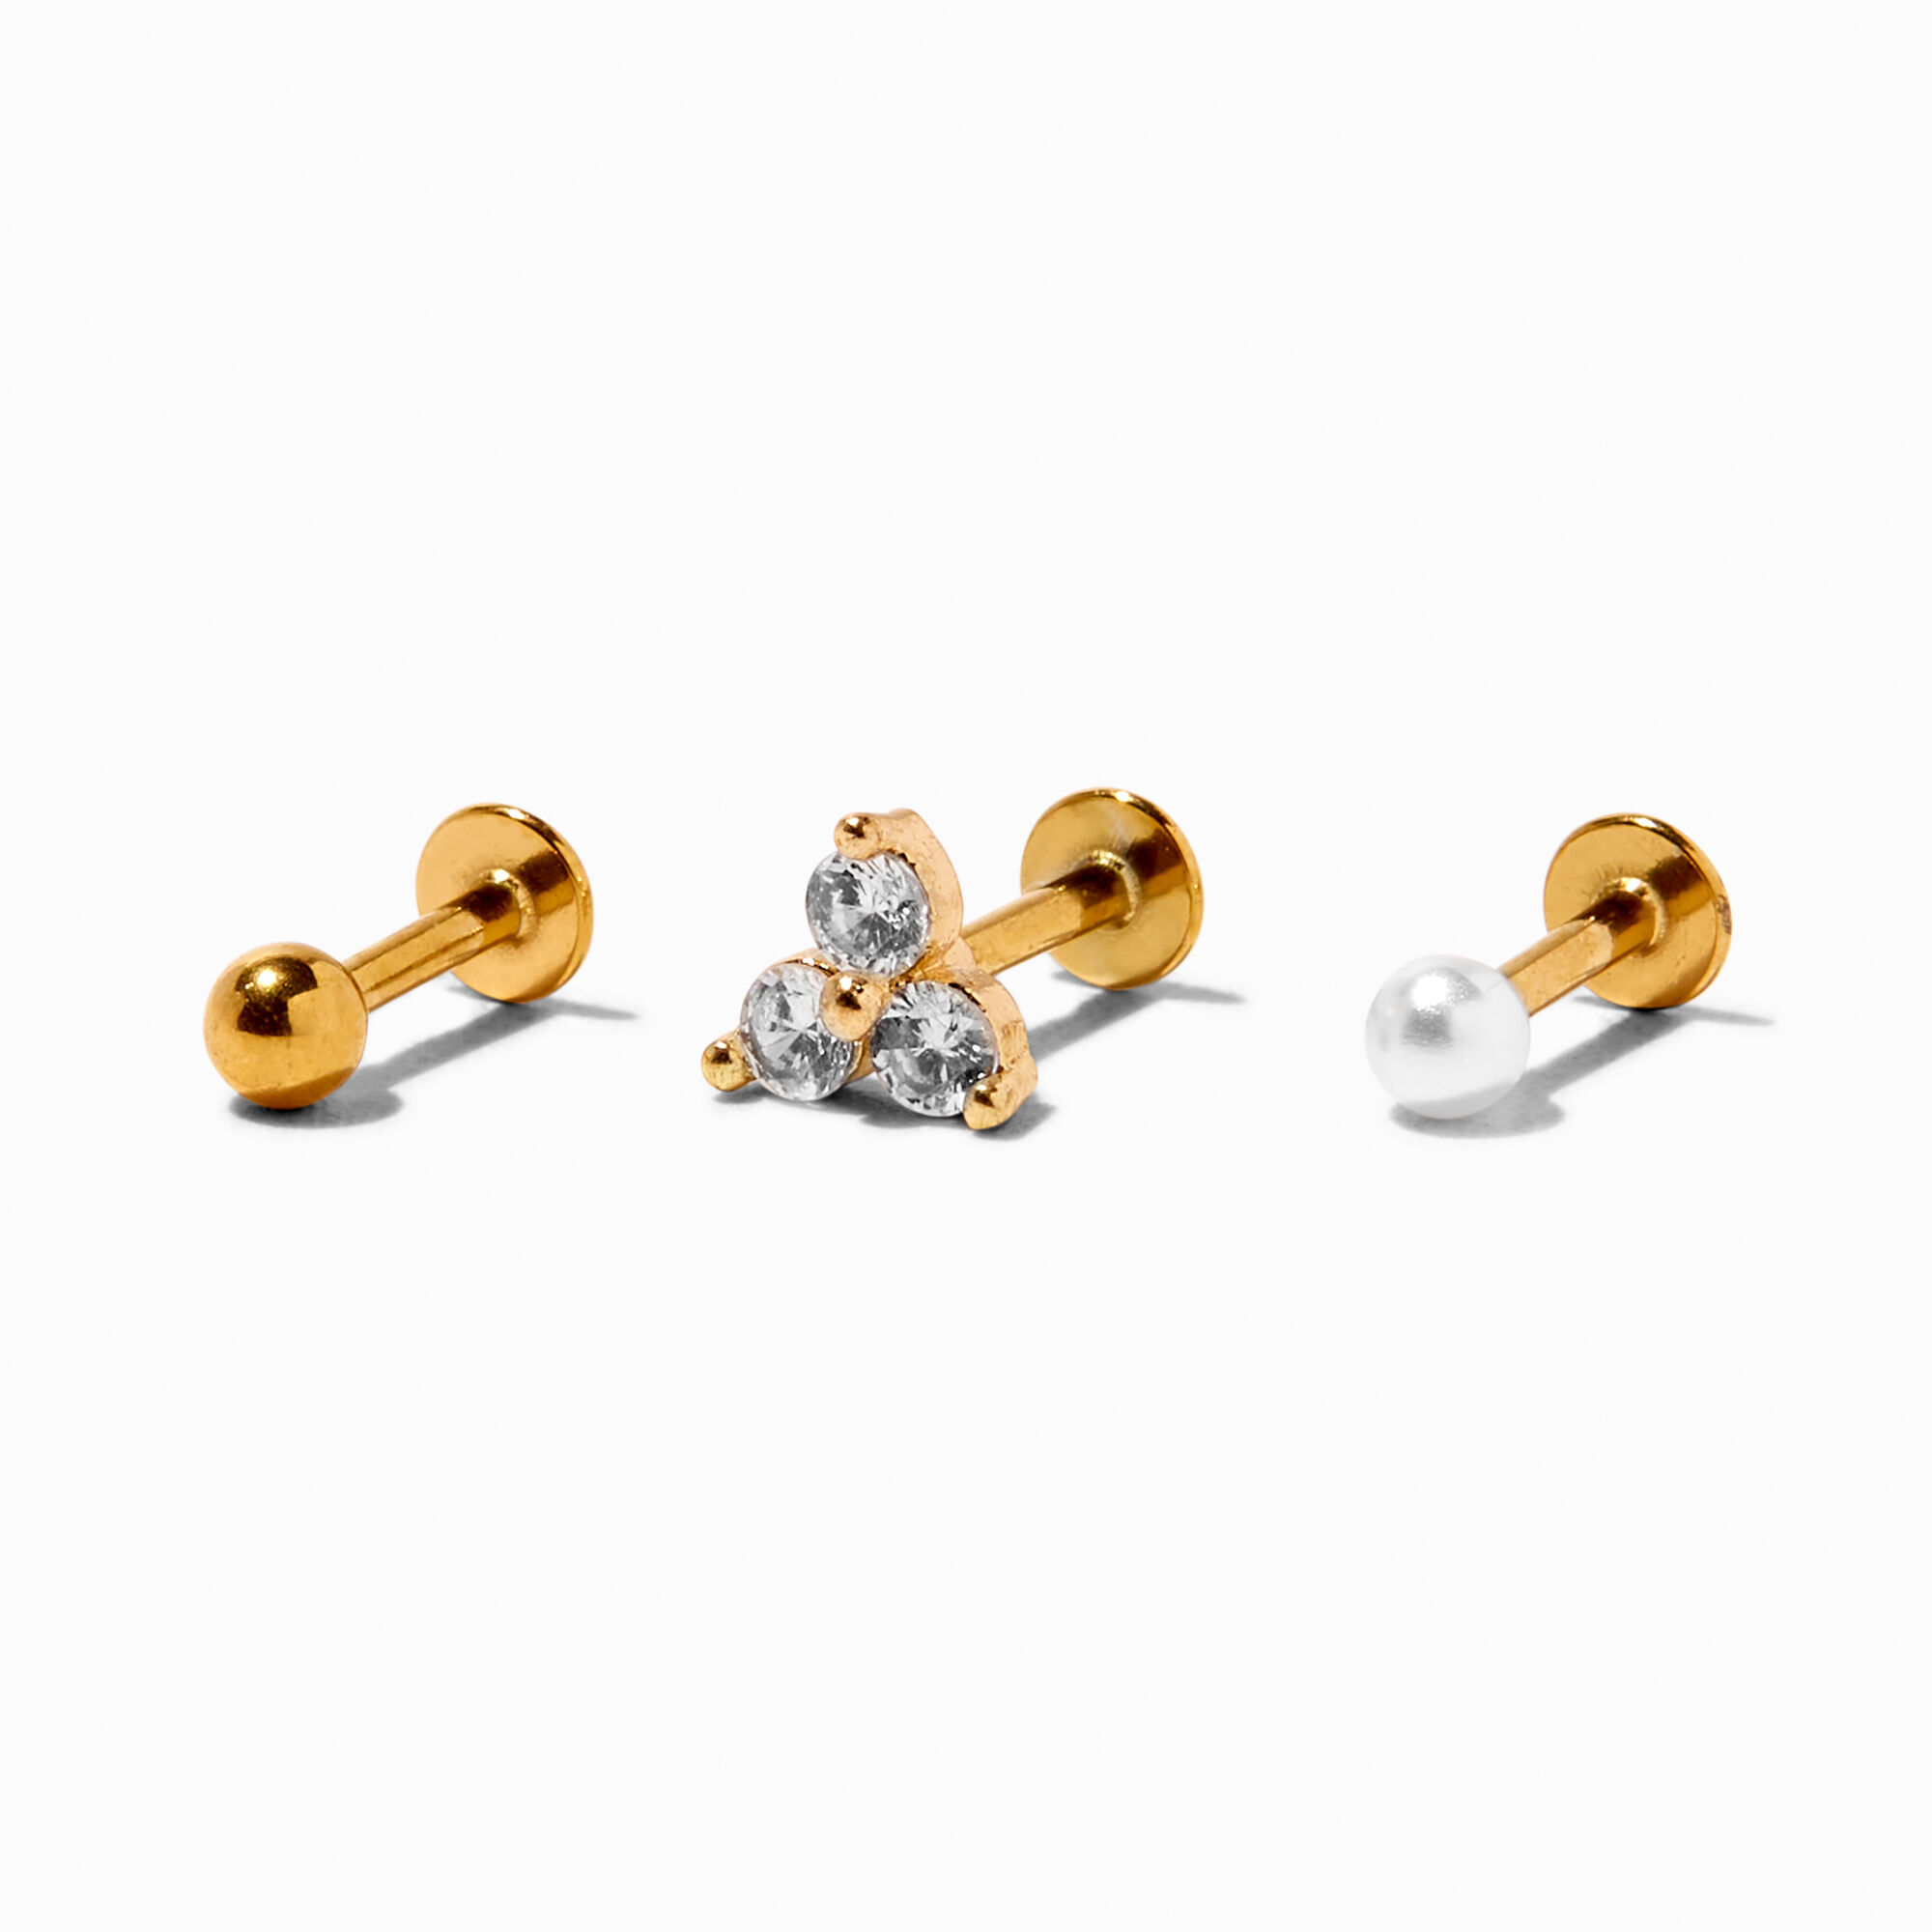 View Claires 16G Crystal TriBall Labret Studs 3 Pack Gold information